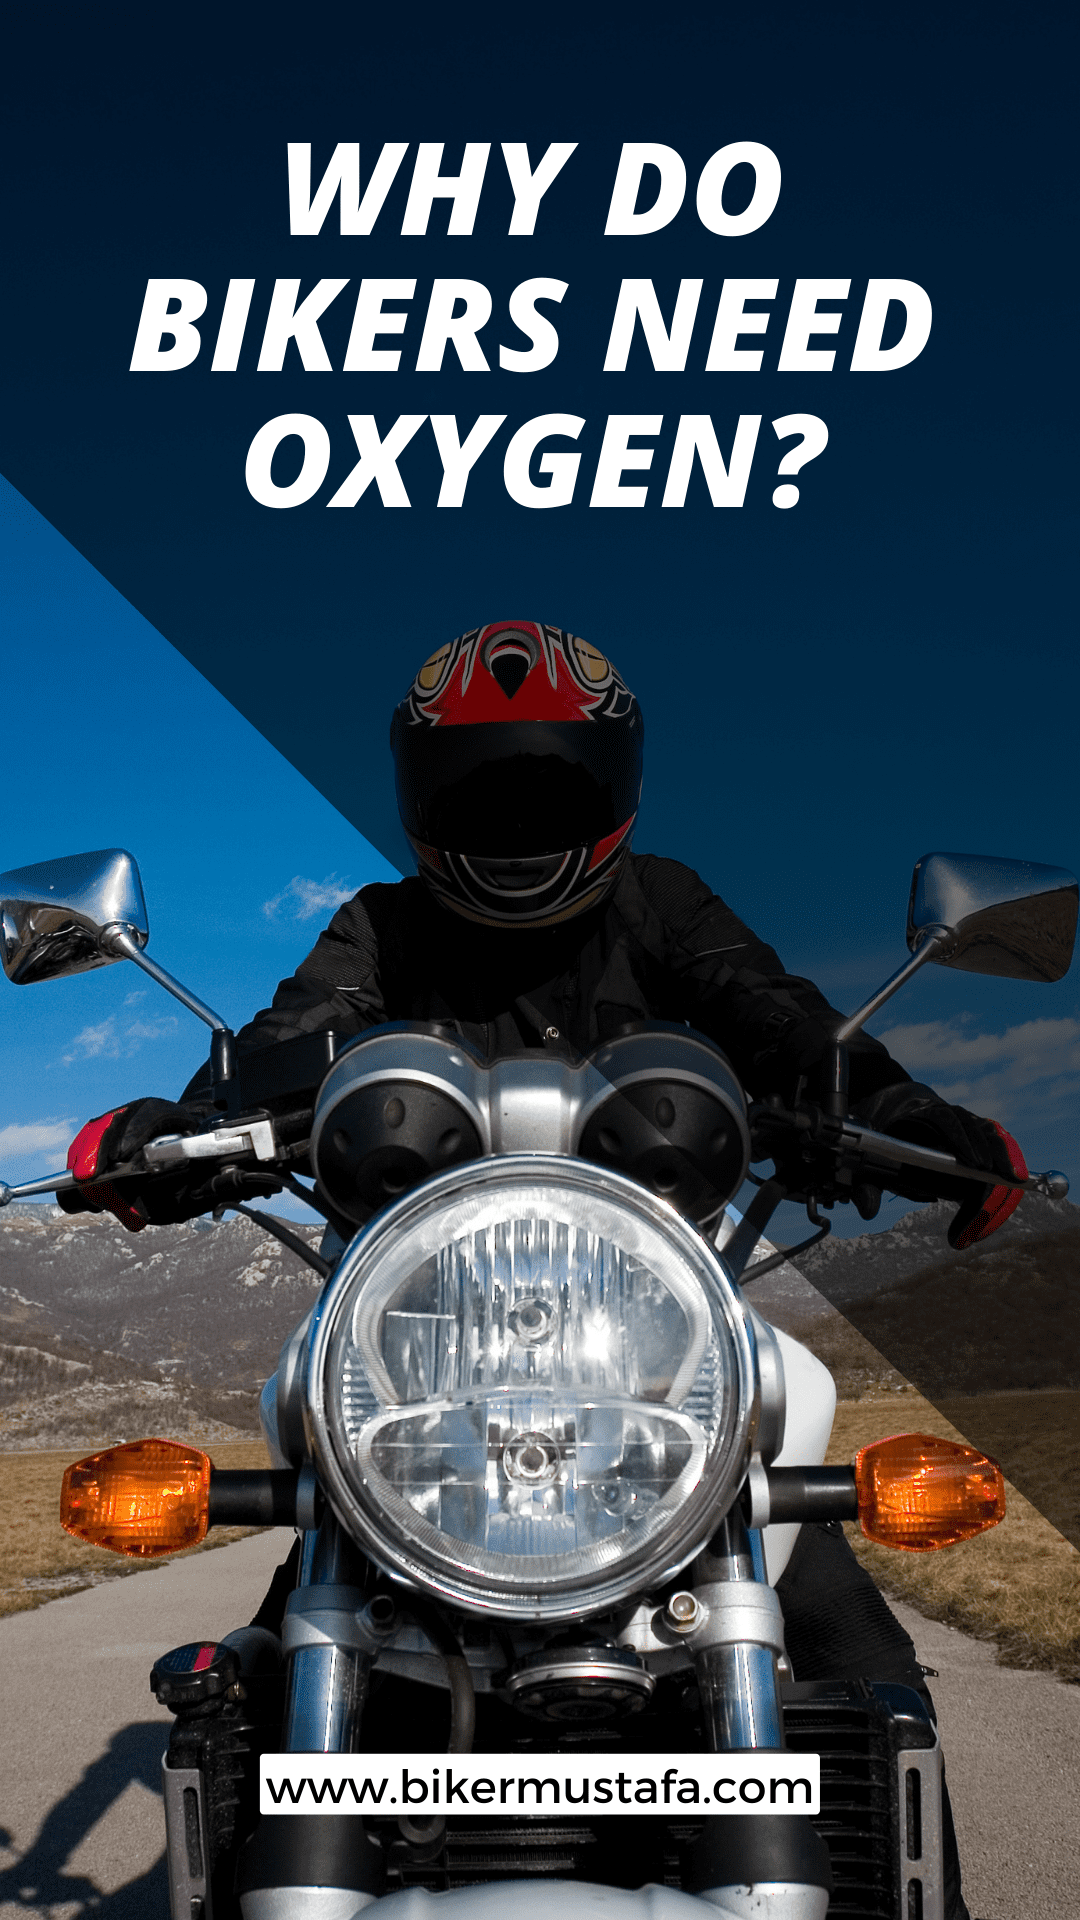 Why Do Bikers Need Oxygen?